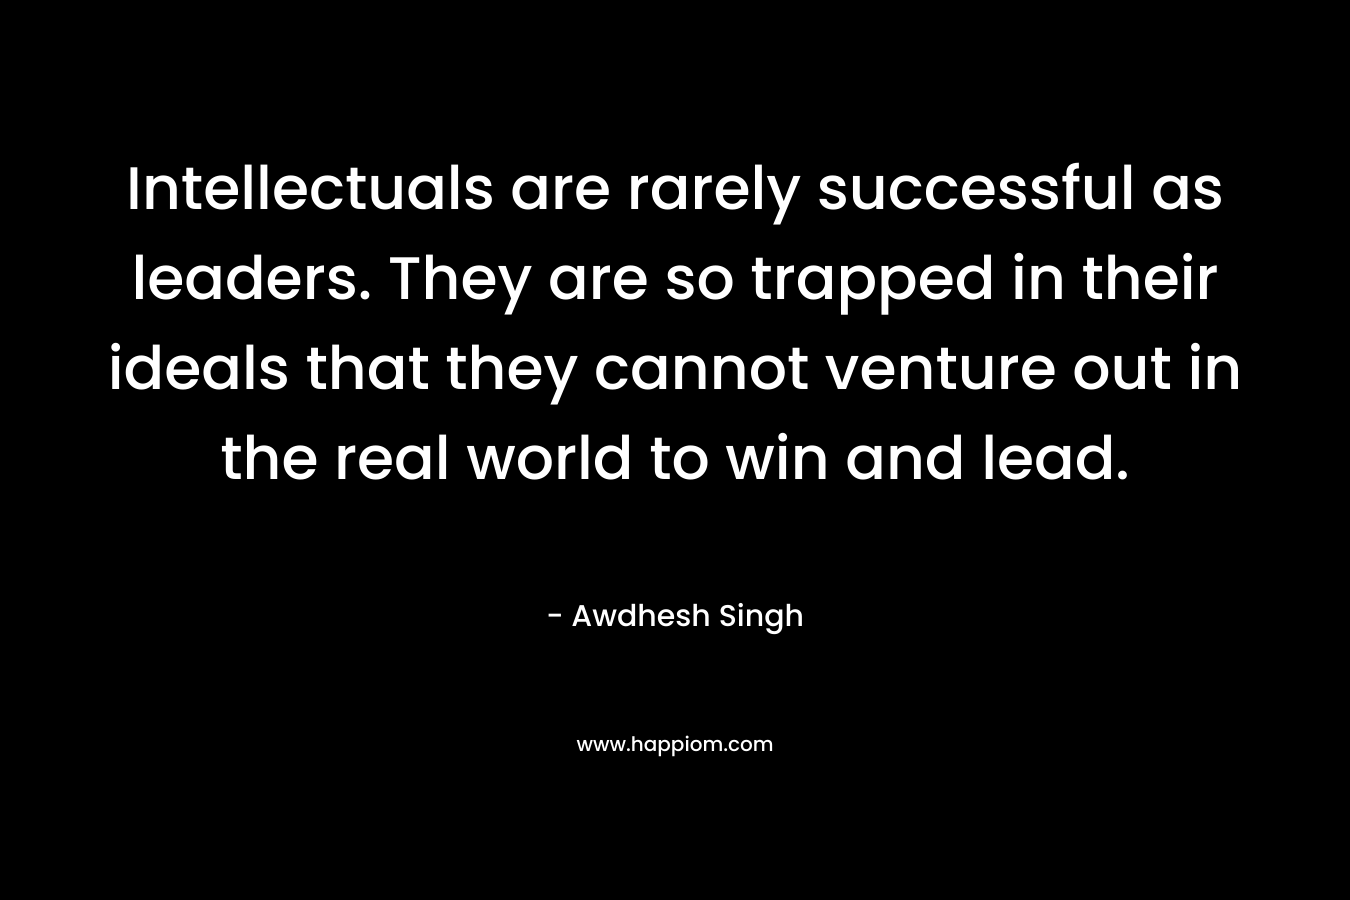 Intellectuals are rarely successful as leaders. They are so trapped in their ideals that they cannot venture out in the real world to win and lead. – Awdhesh Singh